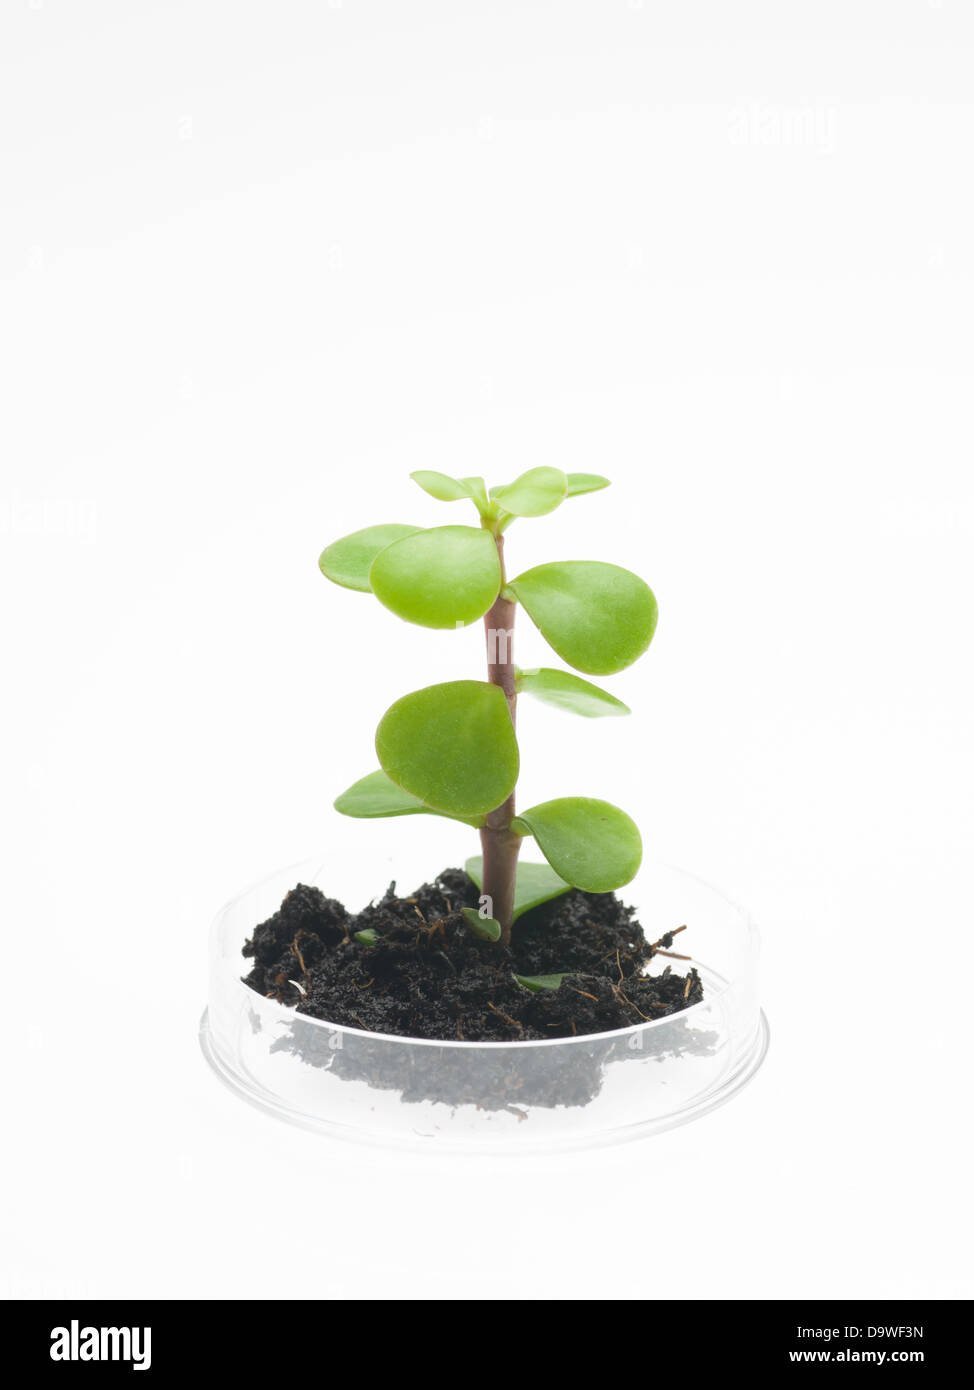 perspective view of petri dish with a small sprout of a leafy plant emerging from a clump of dirt, against a white background Stock Photo